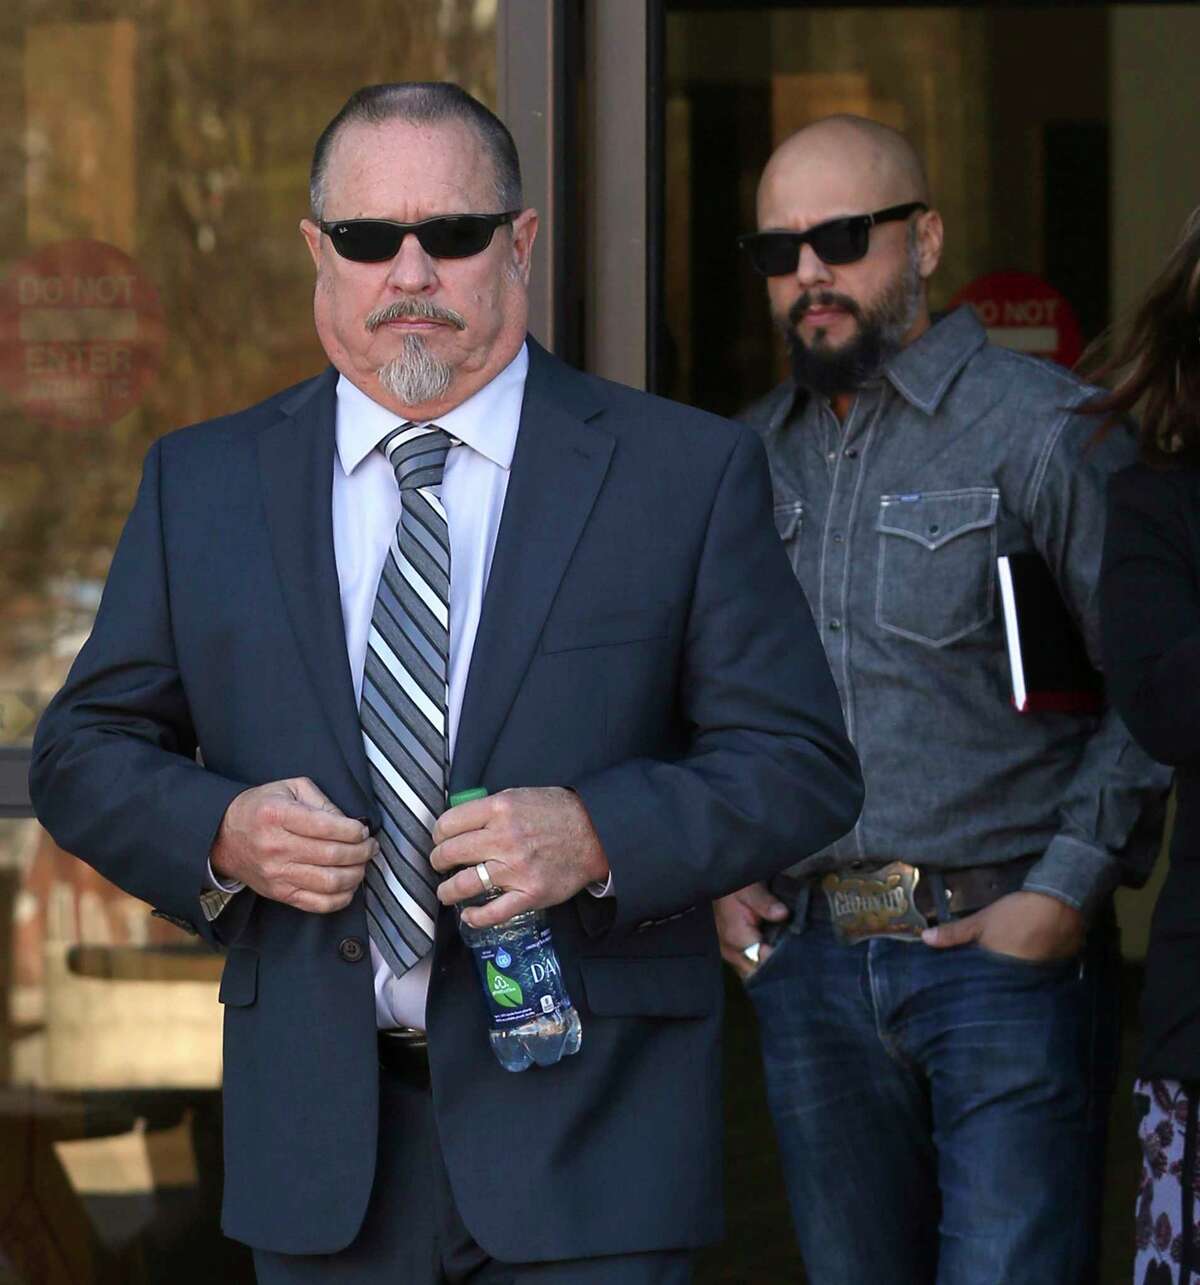 Jeff Pike, left, the former president of the Bandidos, is accused of sanctioning violent acts listed in an indictment, including attacks on rival bike clubs.